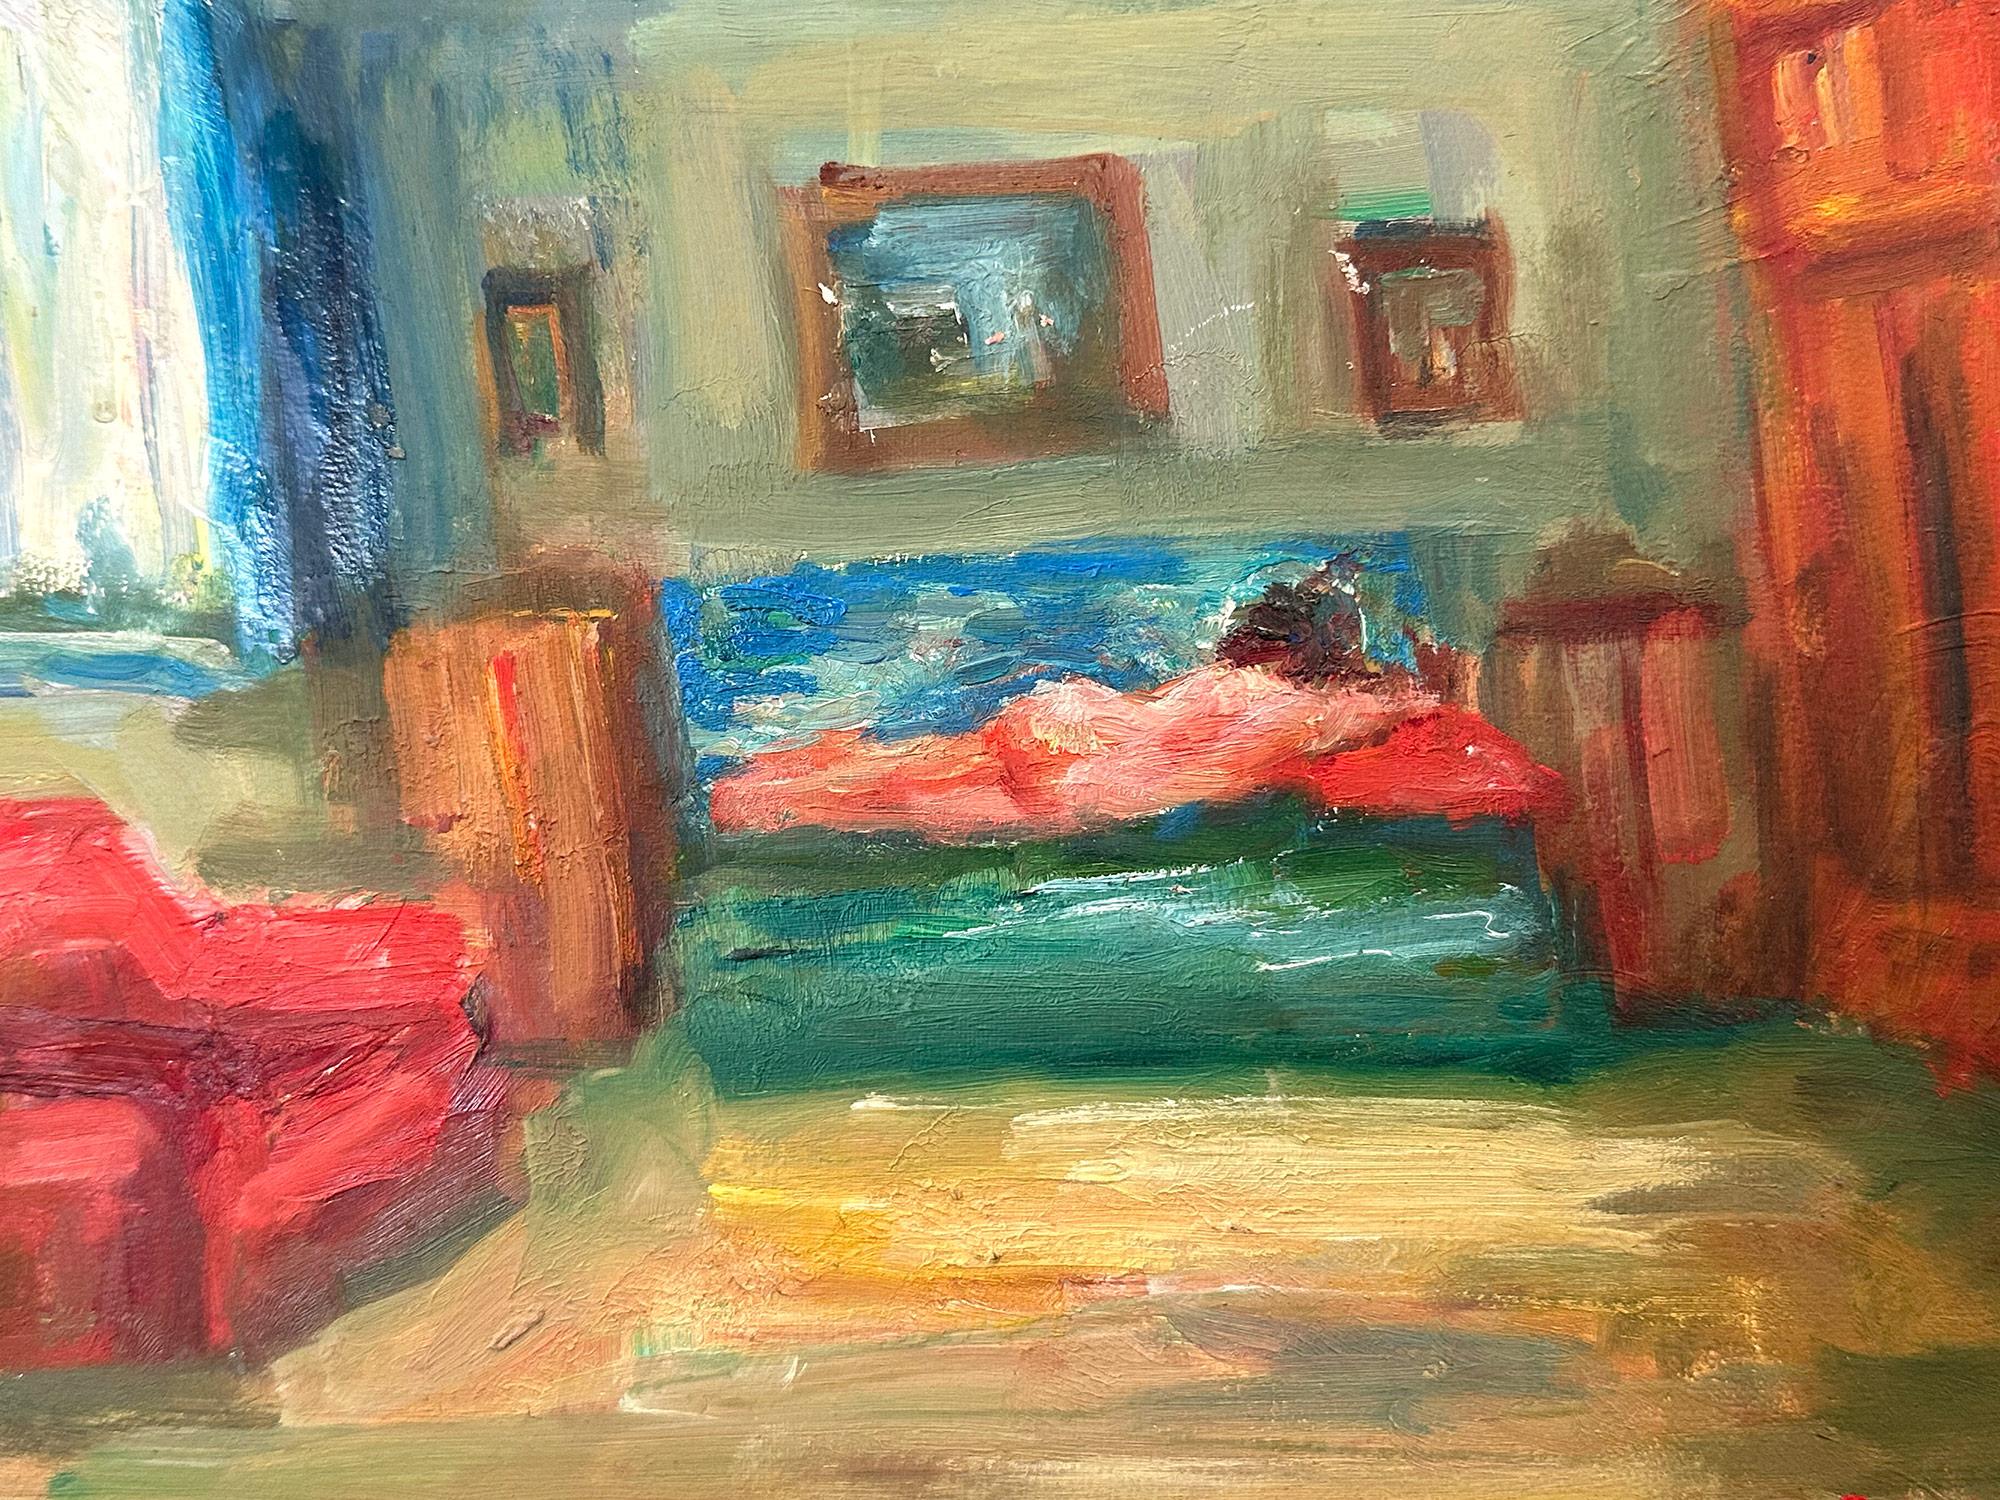 An intimate interior scene of a nude laying on the couch during the day. We are charmed by the rich choice of color and intimate details throughout this miniature work. This painting depicts a nude in a relaxed position with the furniture of the